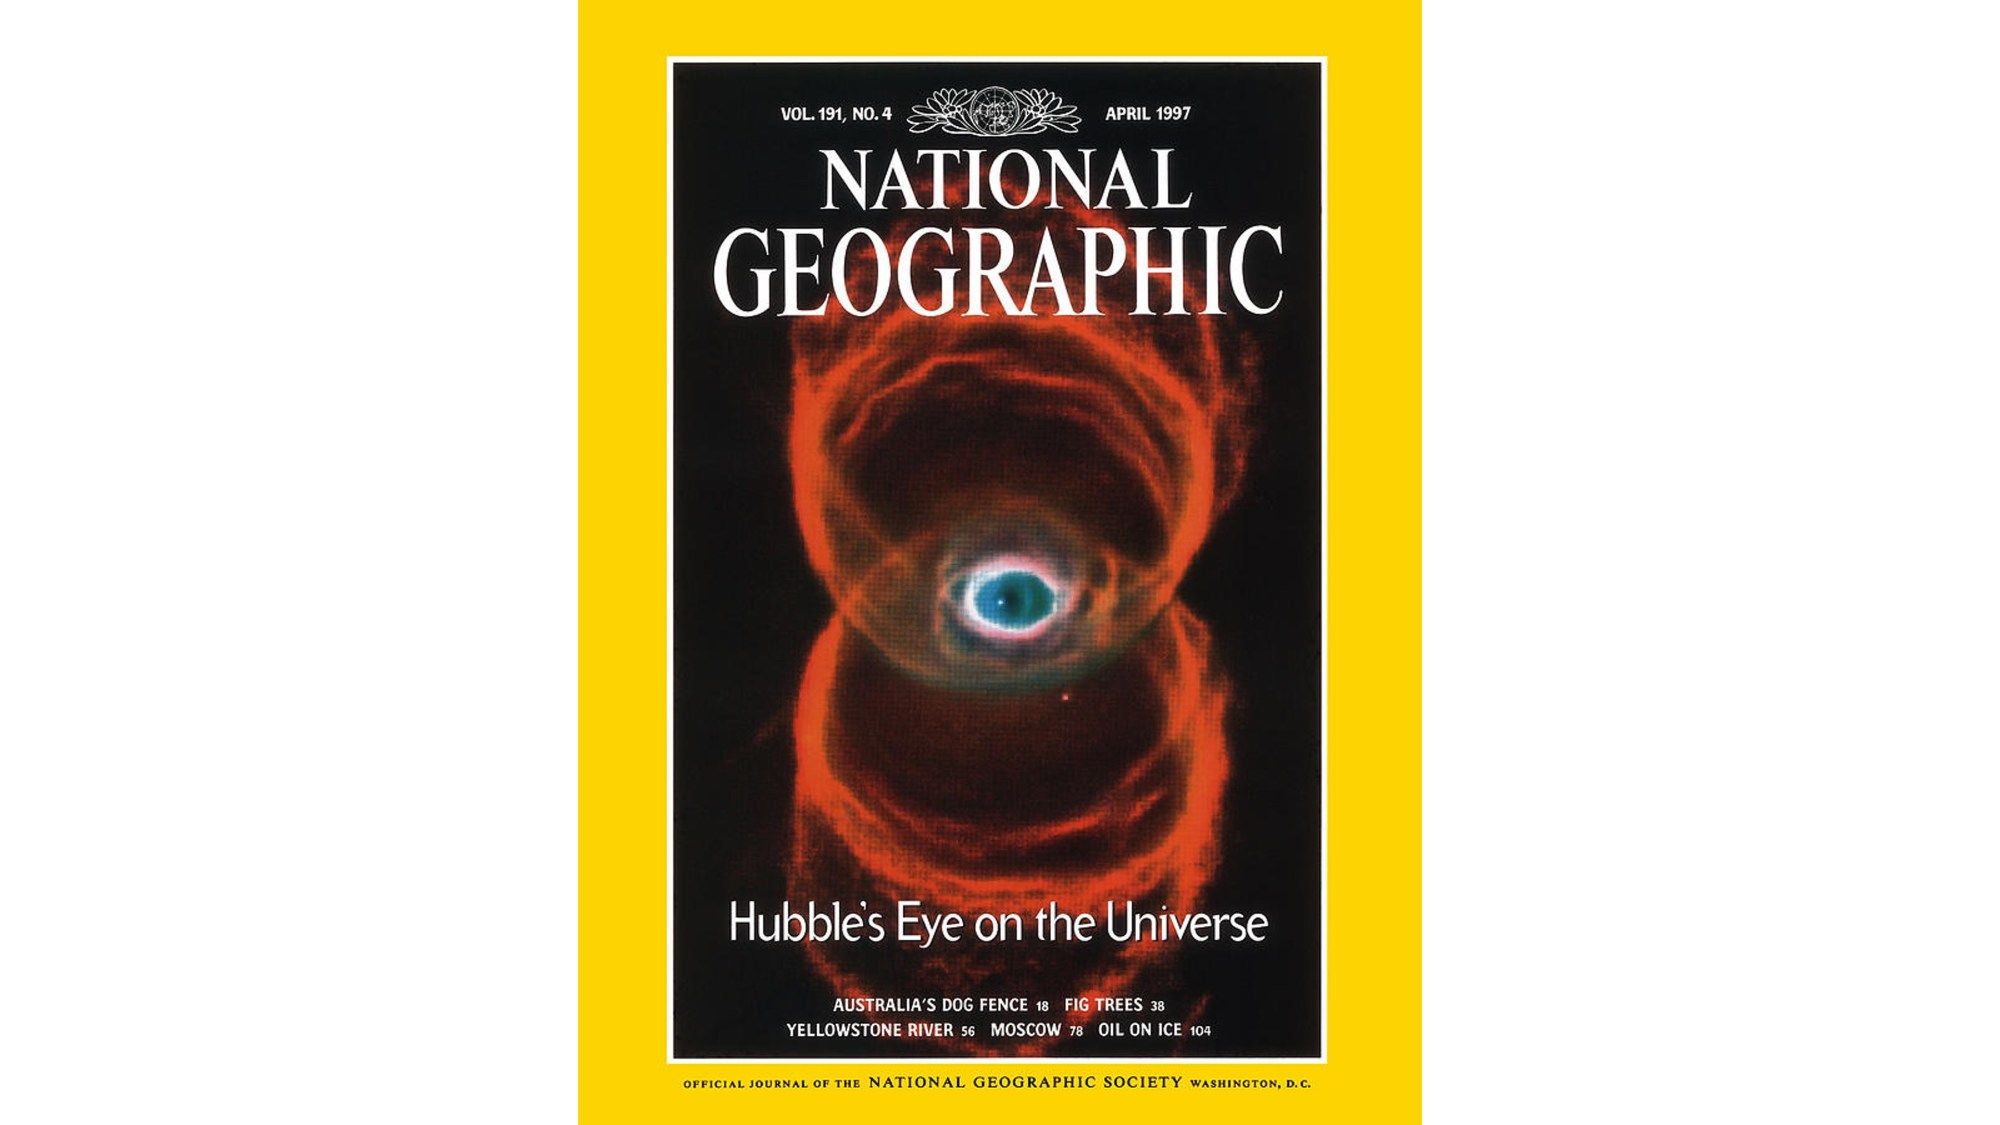 Cover of National Geographic Magazine with Hubble nebula image on it.